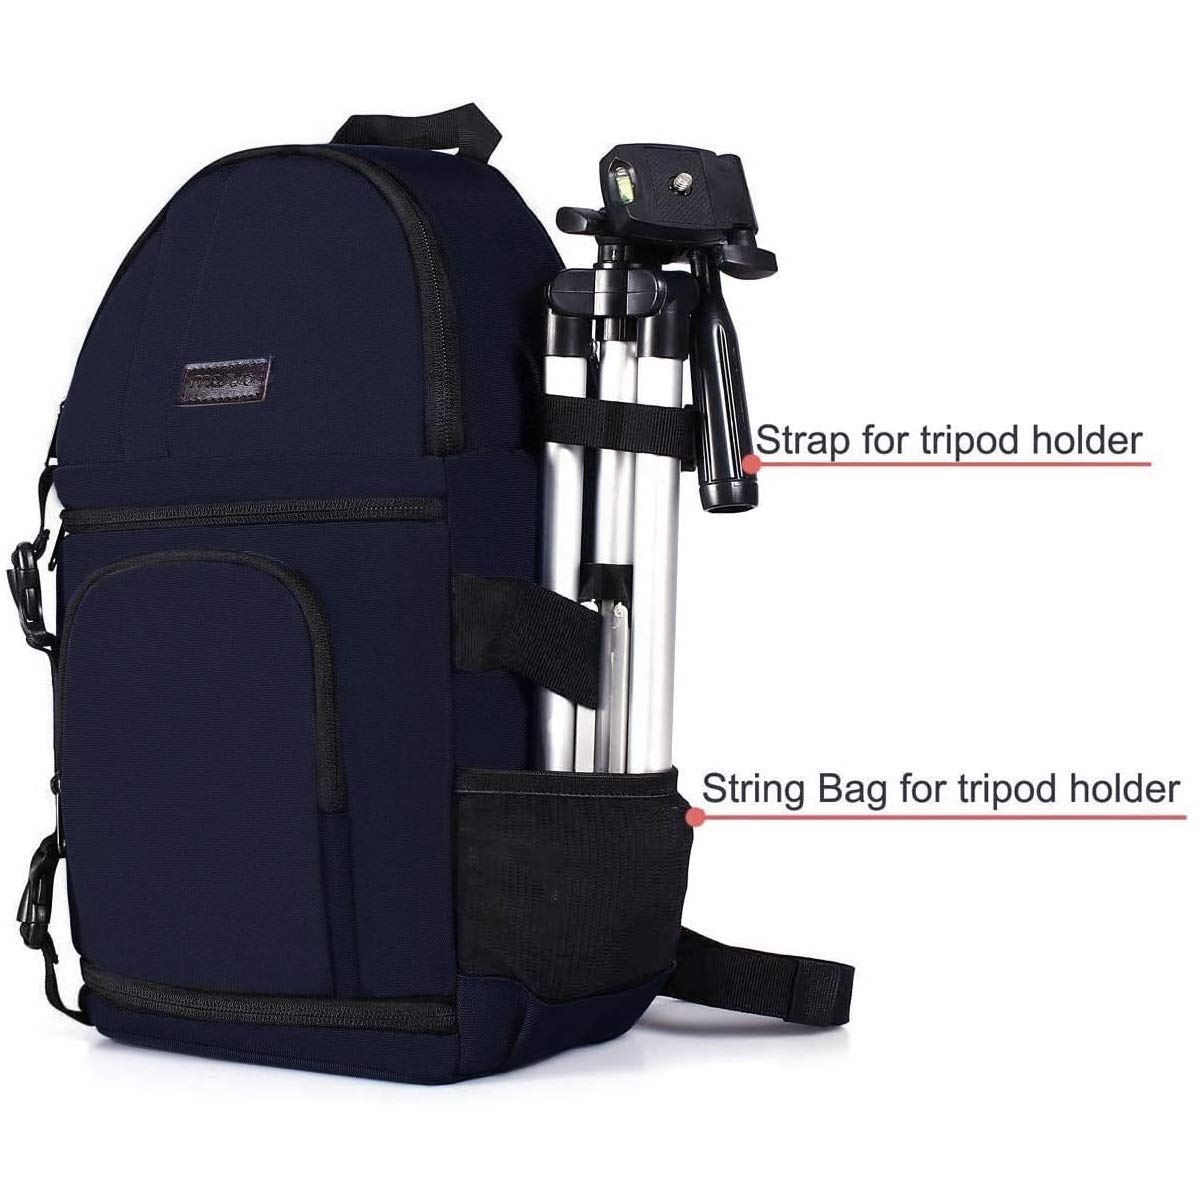 MOSISO Camera Sling Bag, DSLR/SLR/Mirrorless Camera Case Shockproof Photography Camera Backpack with Tripod Holder & Removable Modular Inserts Compatible with Canon/Nikon/Sony/Fuji, Navy Blue